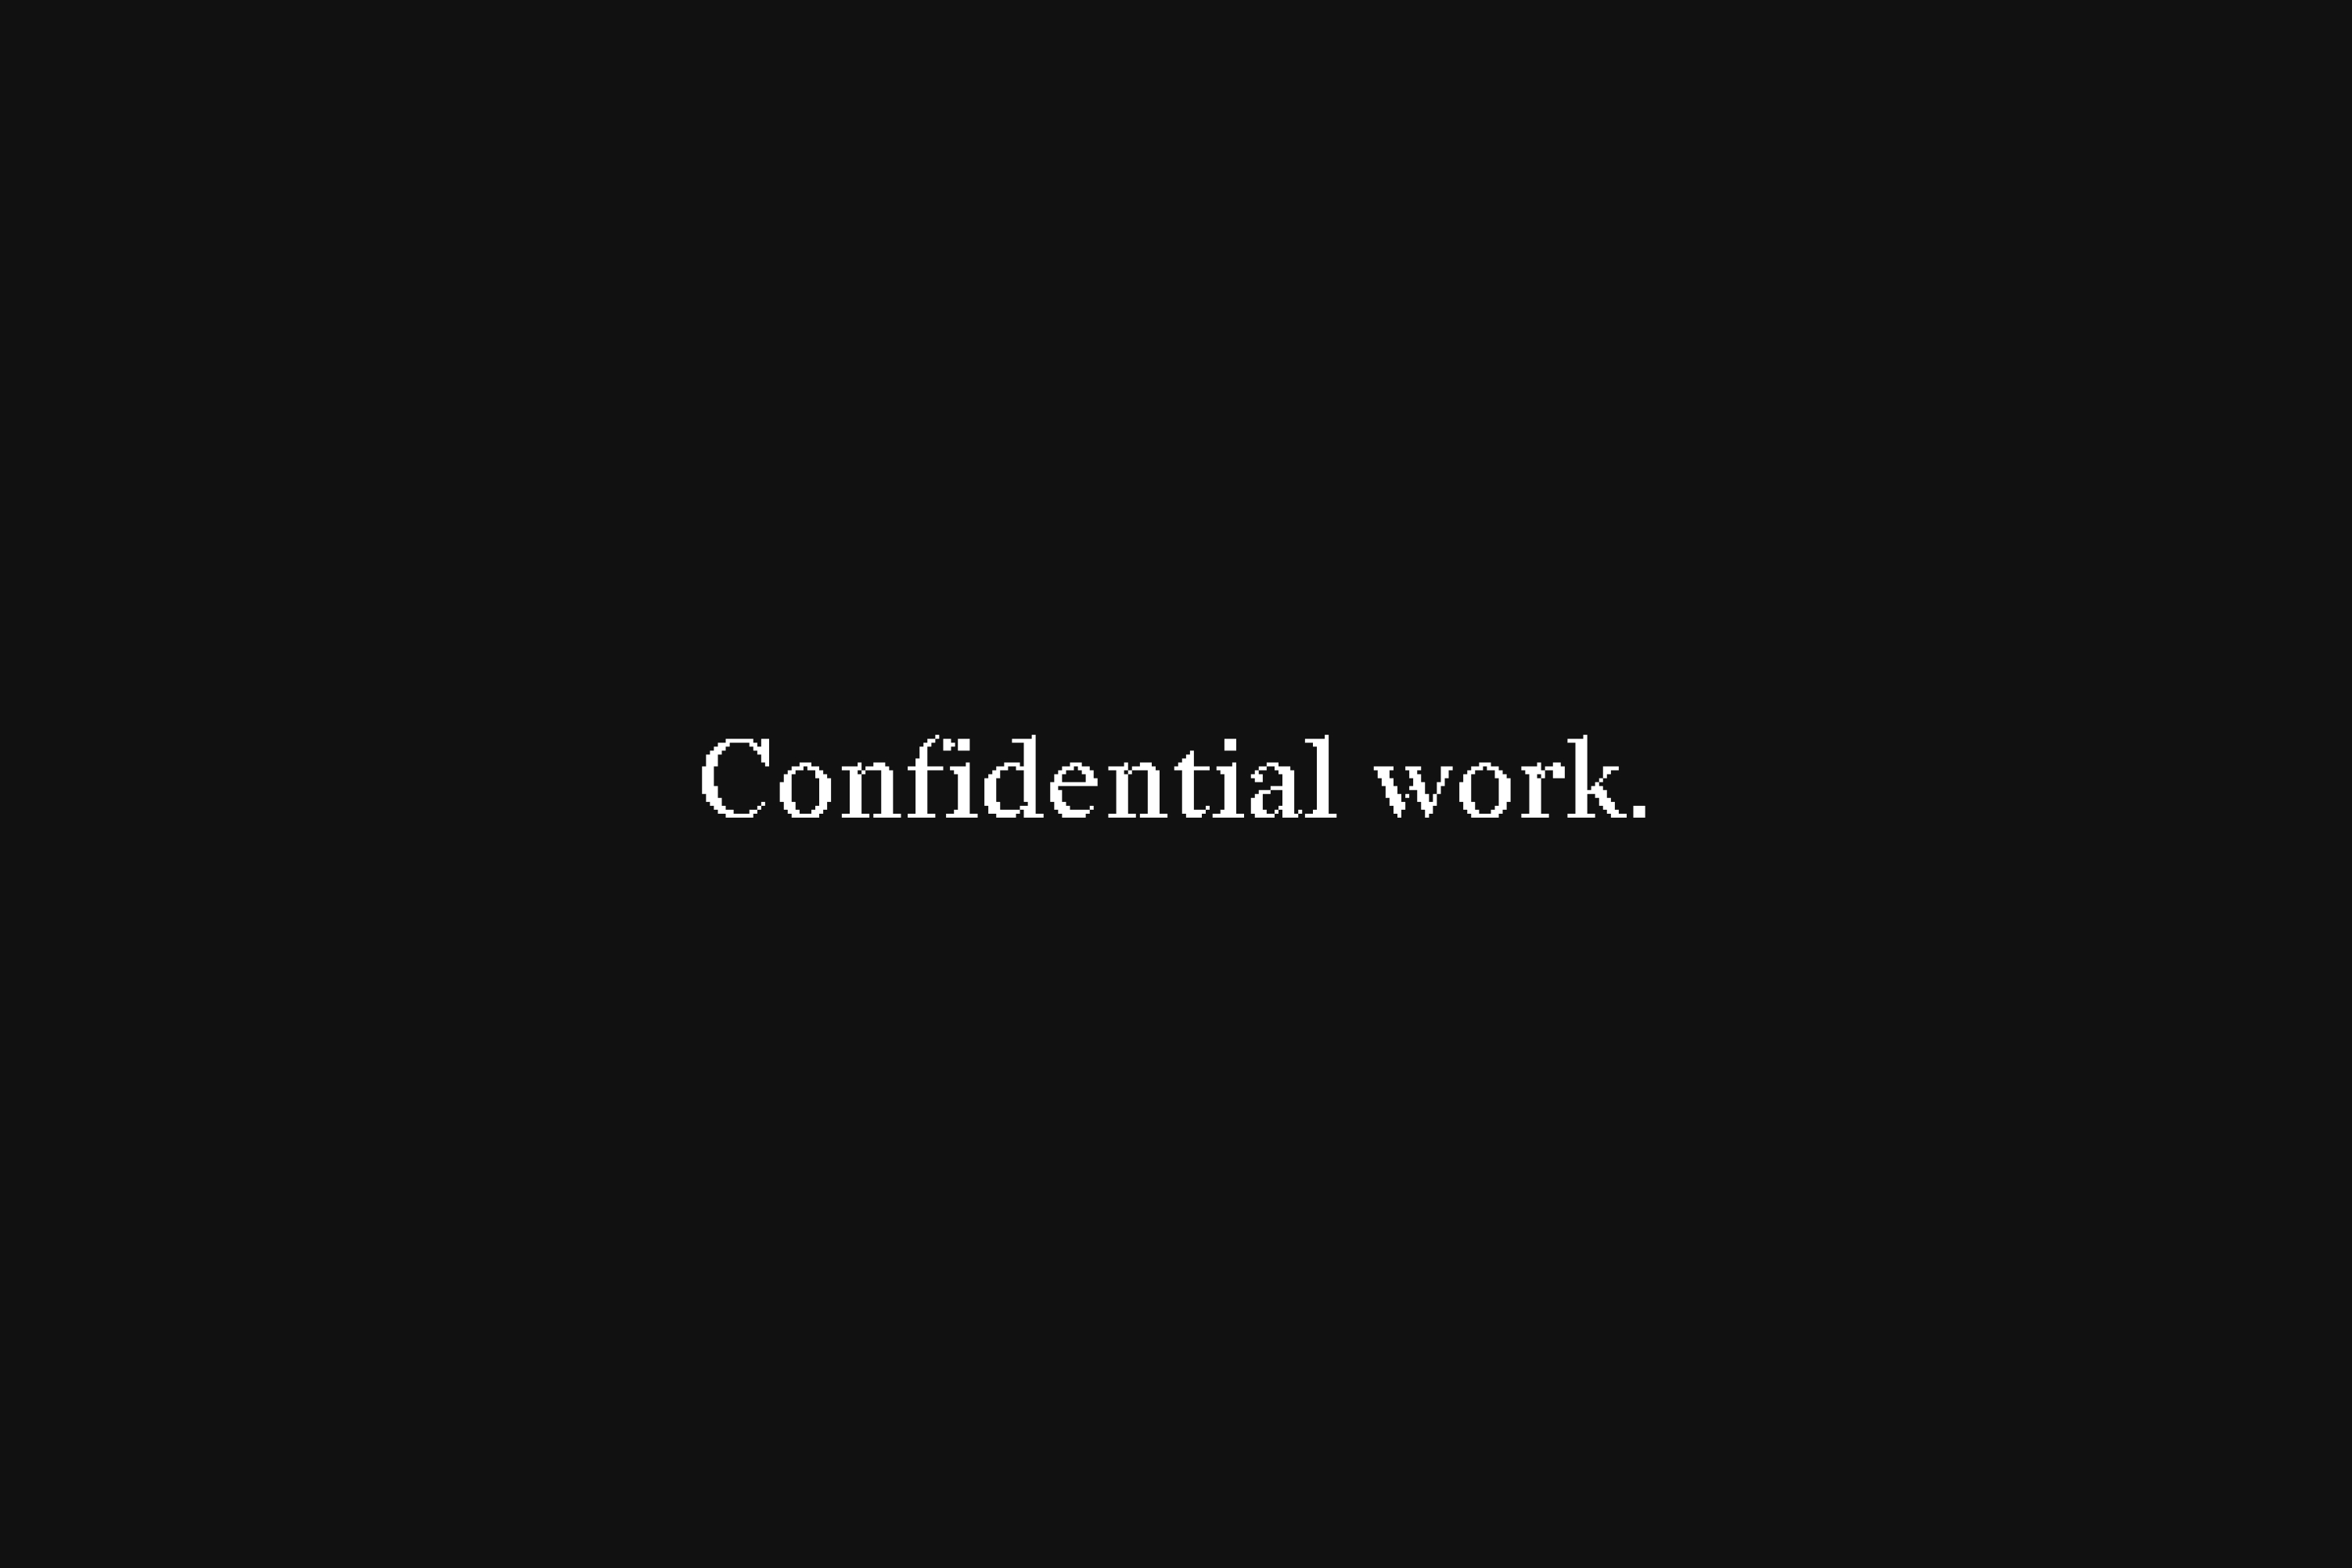 Unfortunately, my work at Fjord is confidential